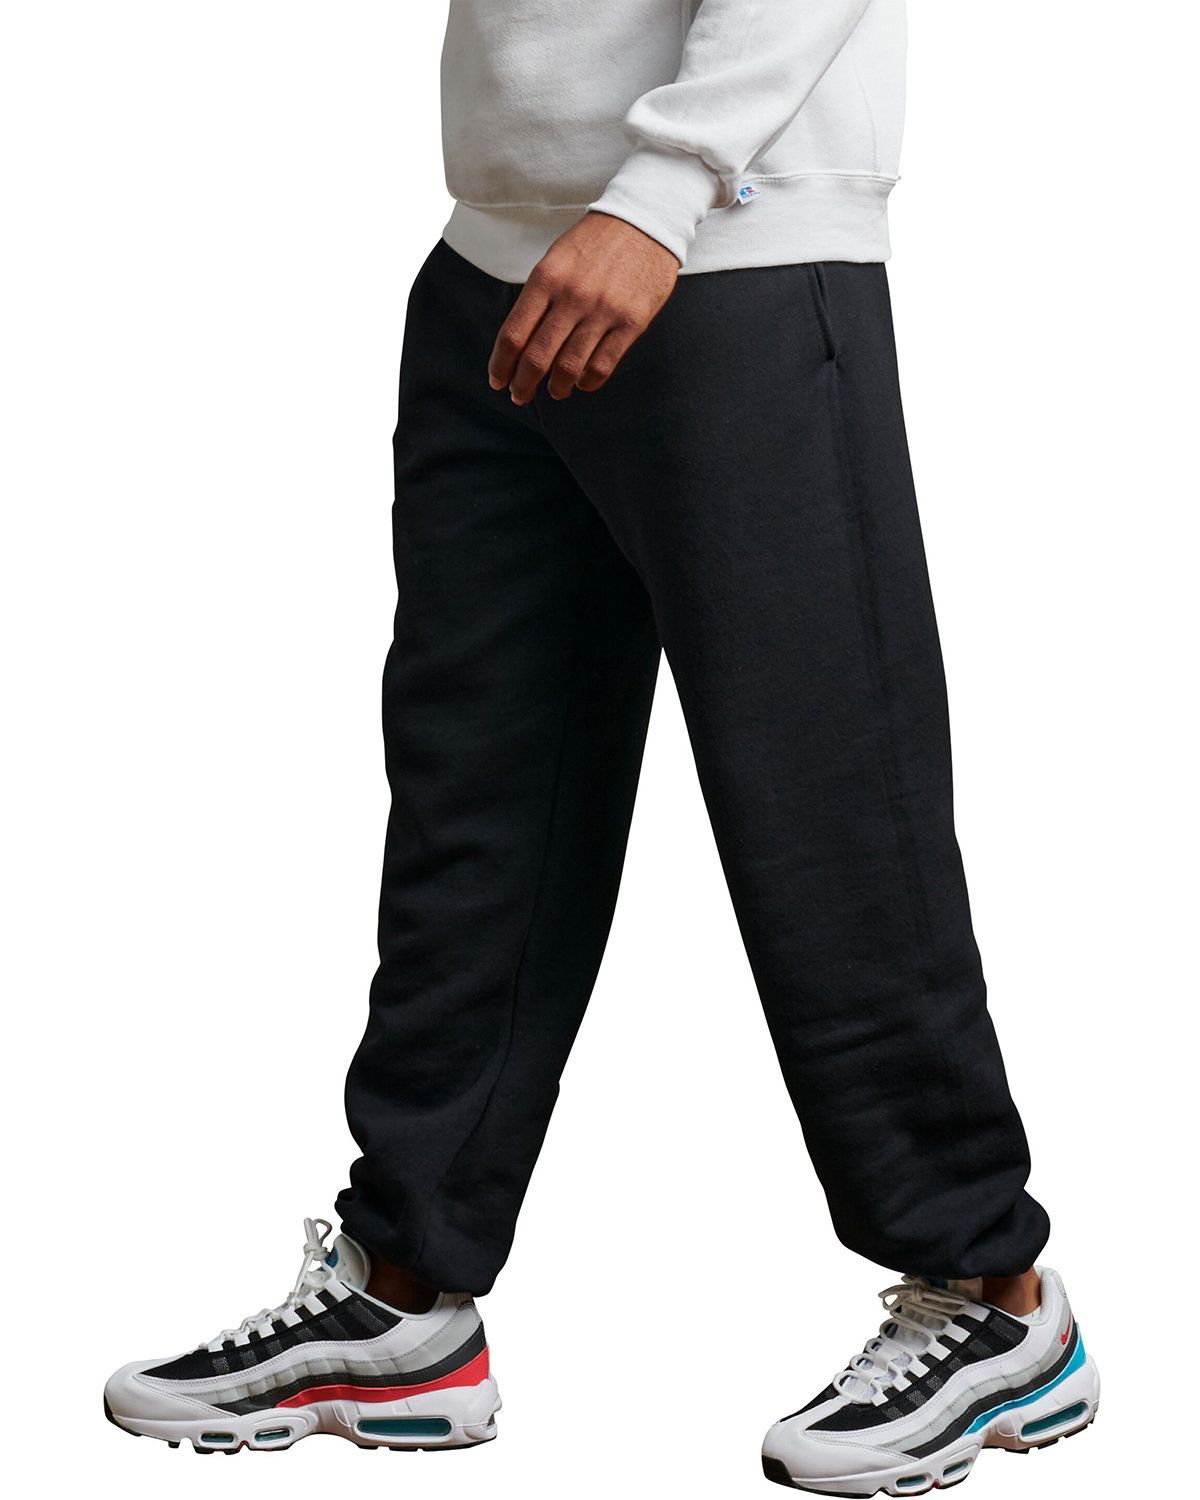 Russell Athletic Dri Power® Closed Bottom Sweatpants with Pockets